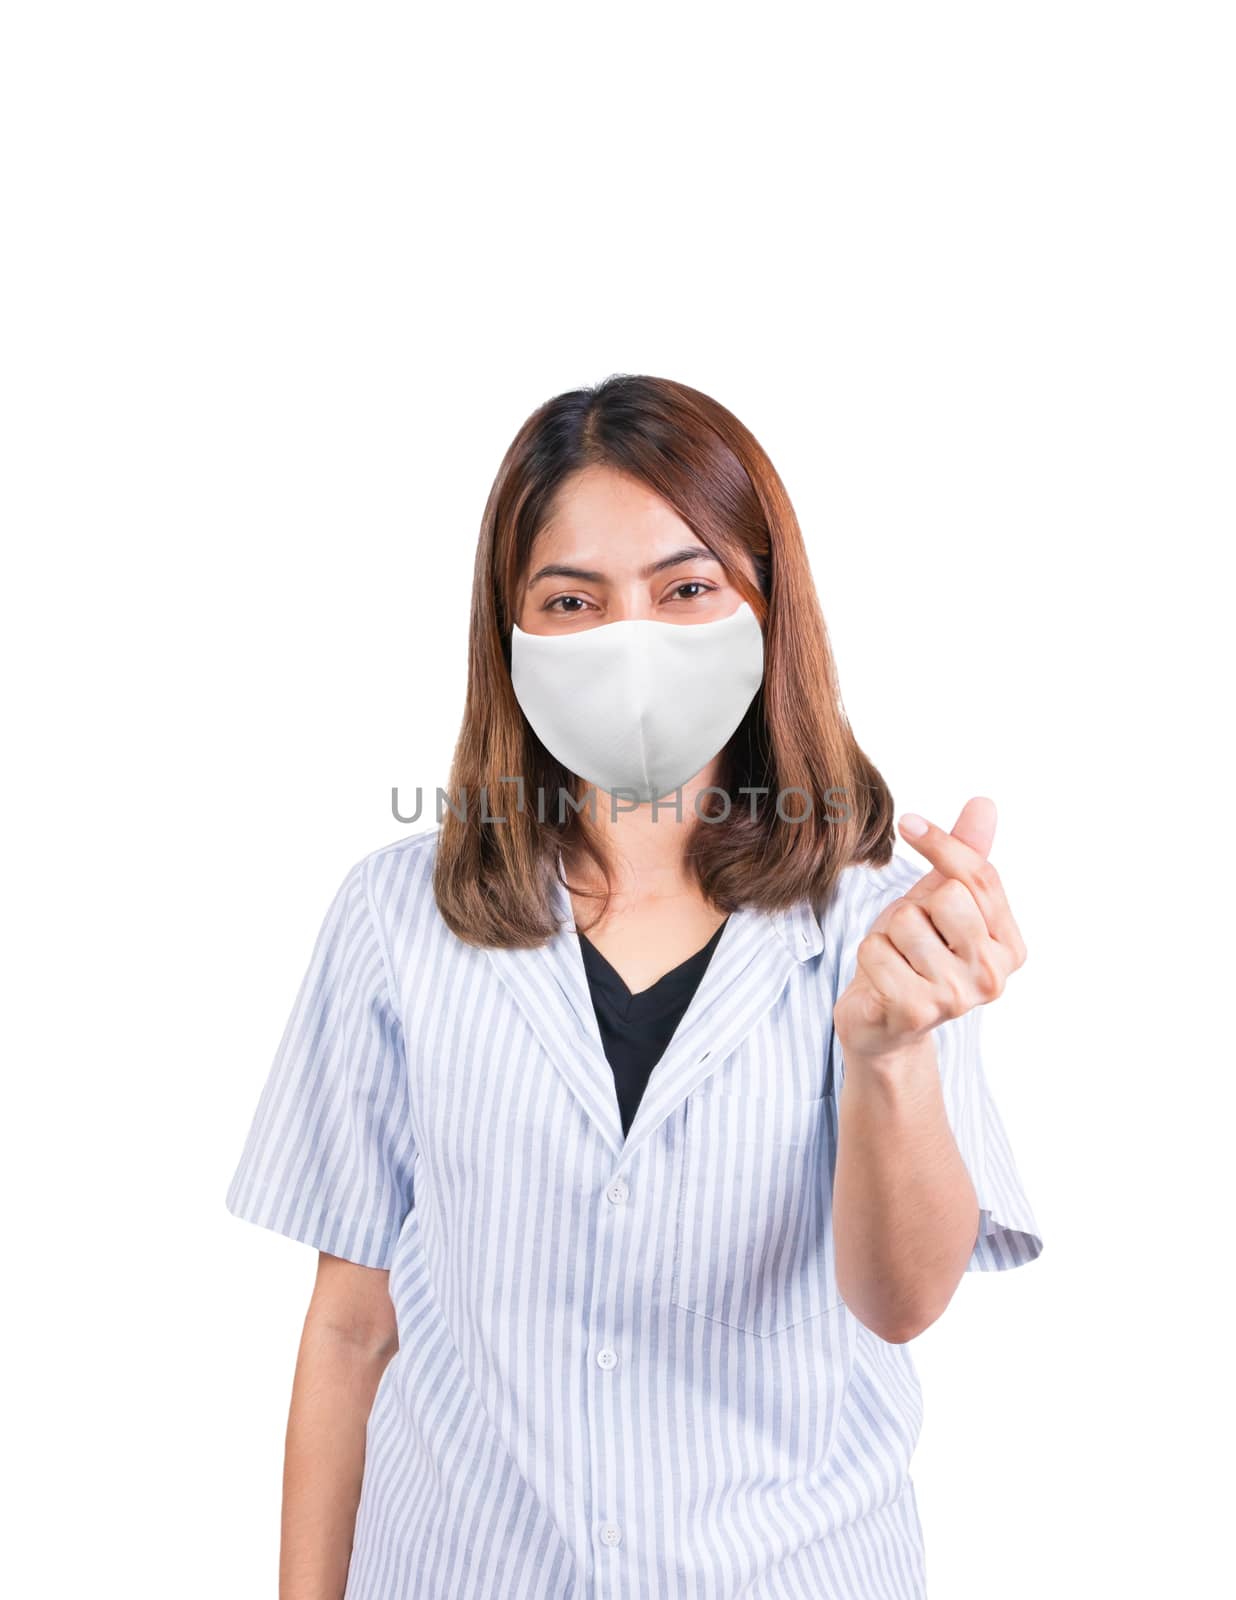 woman showing mini heart sign and wearing fabric mask safety by pramot